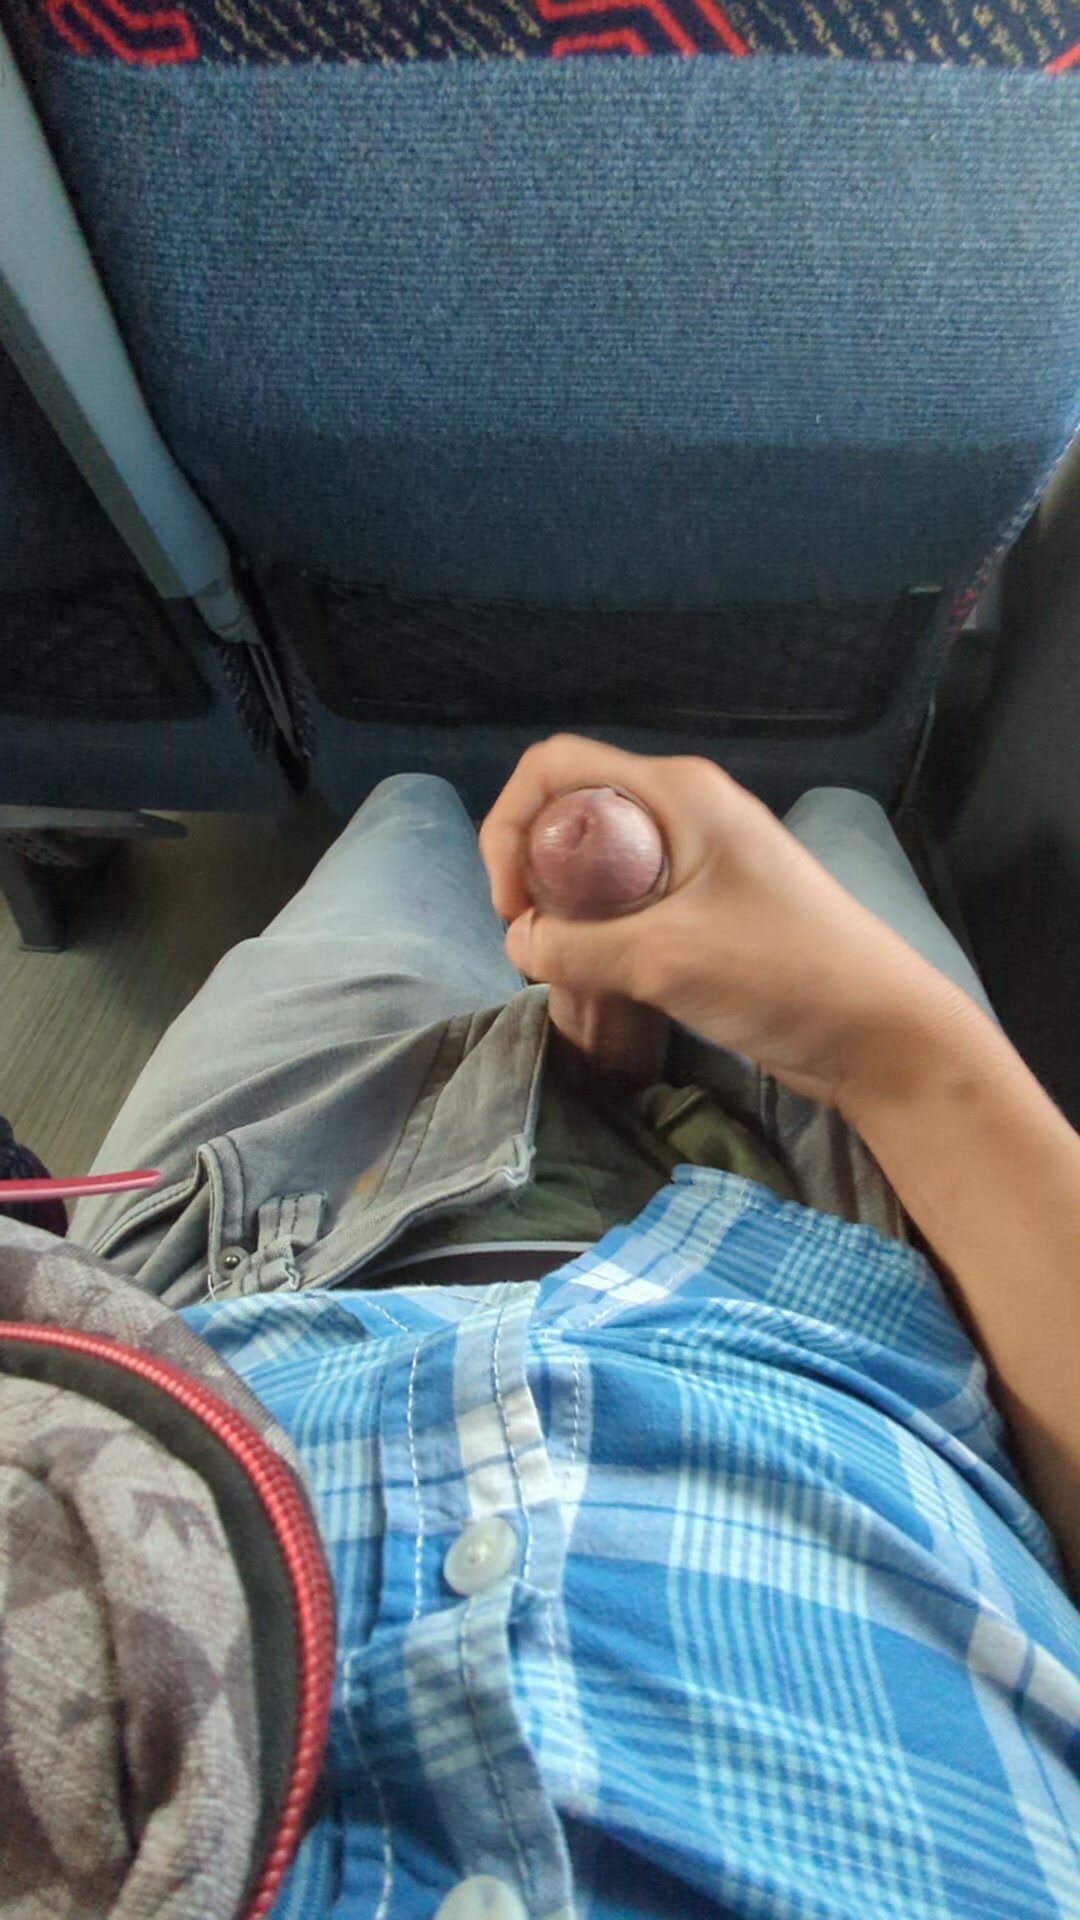 Second Jerkoff on the bus